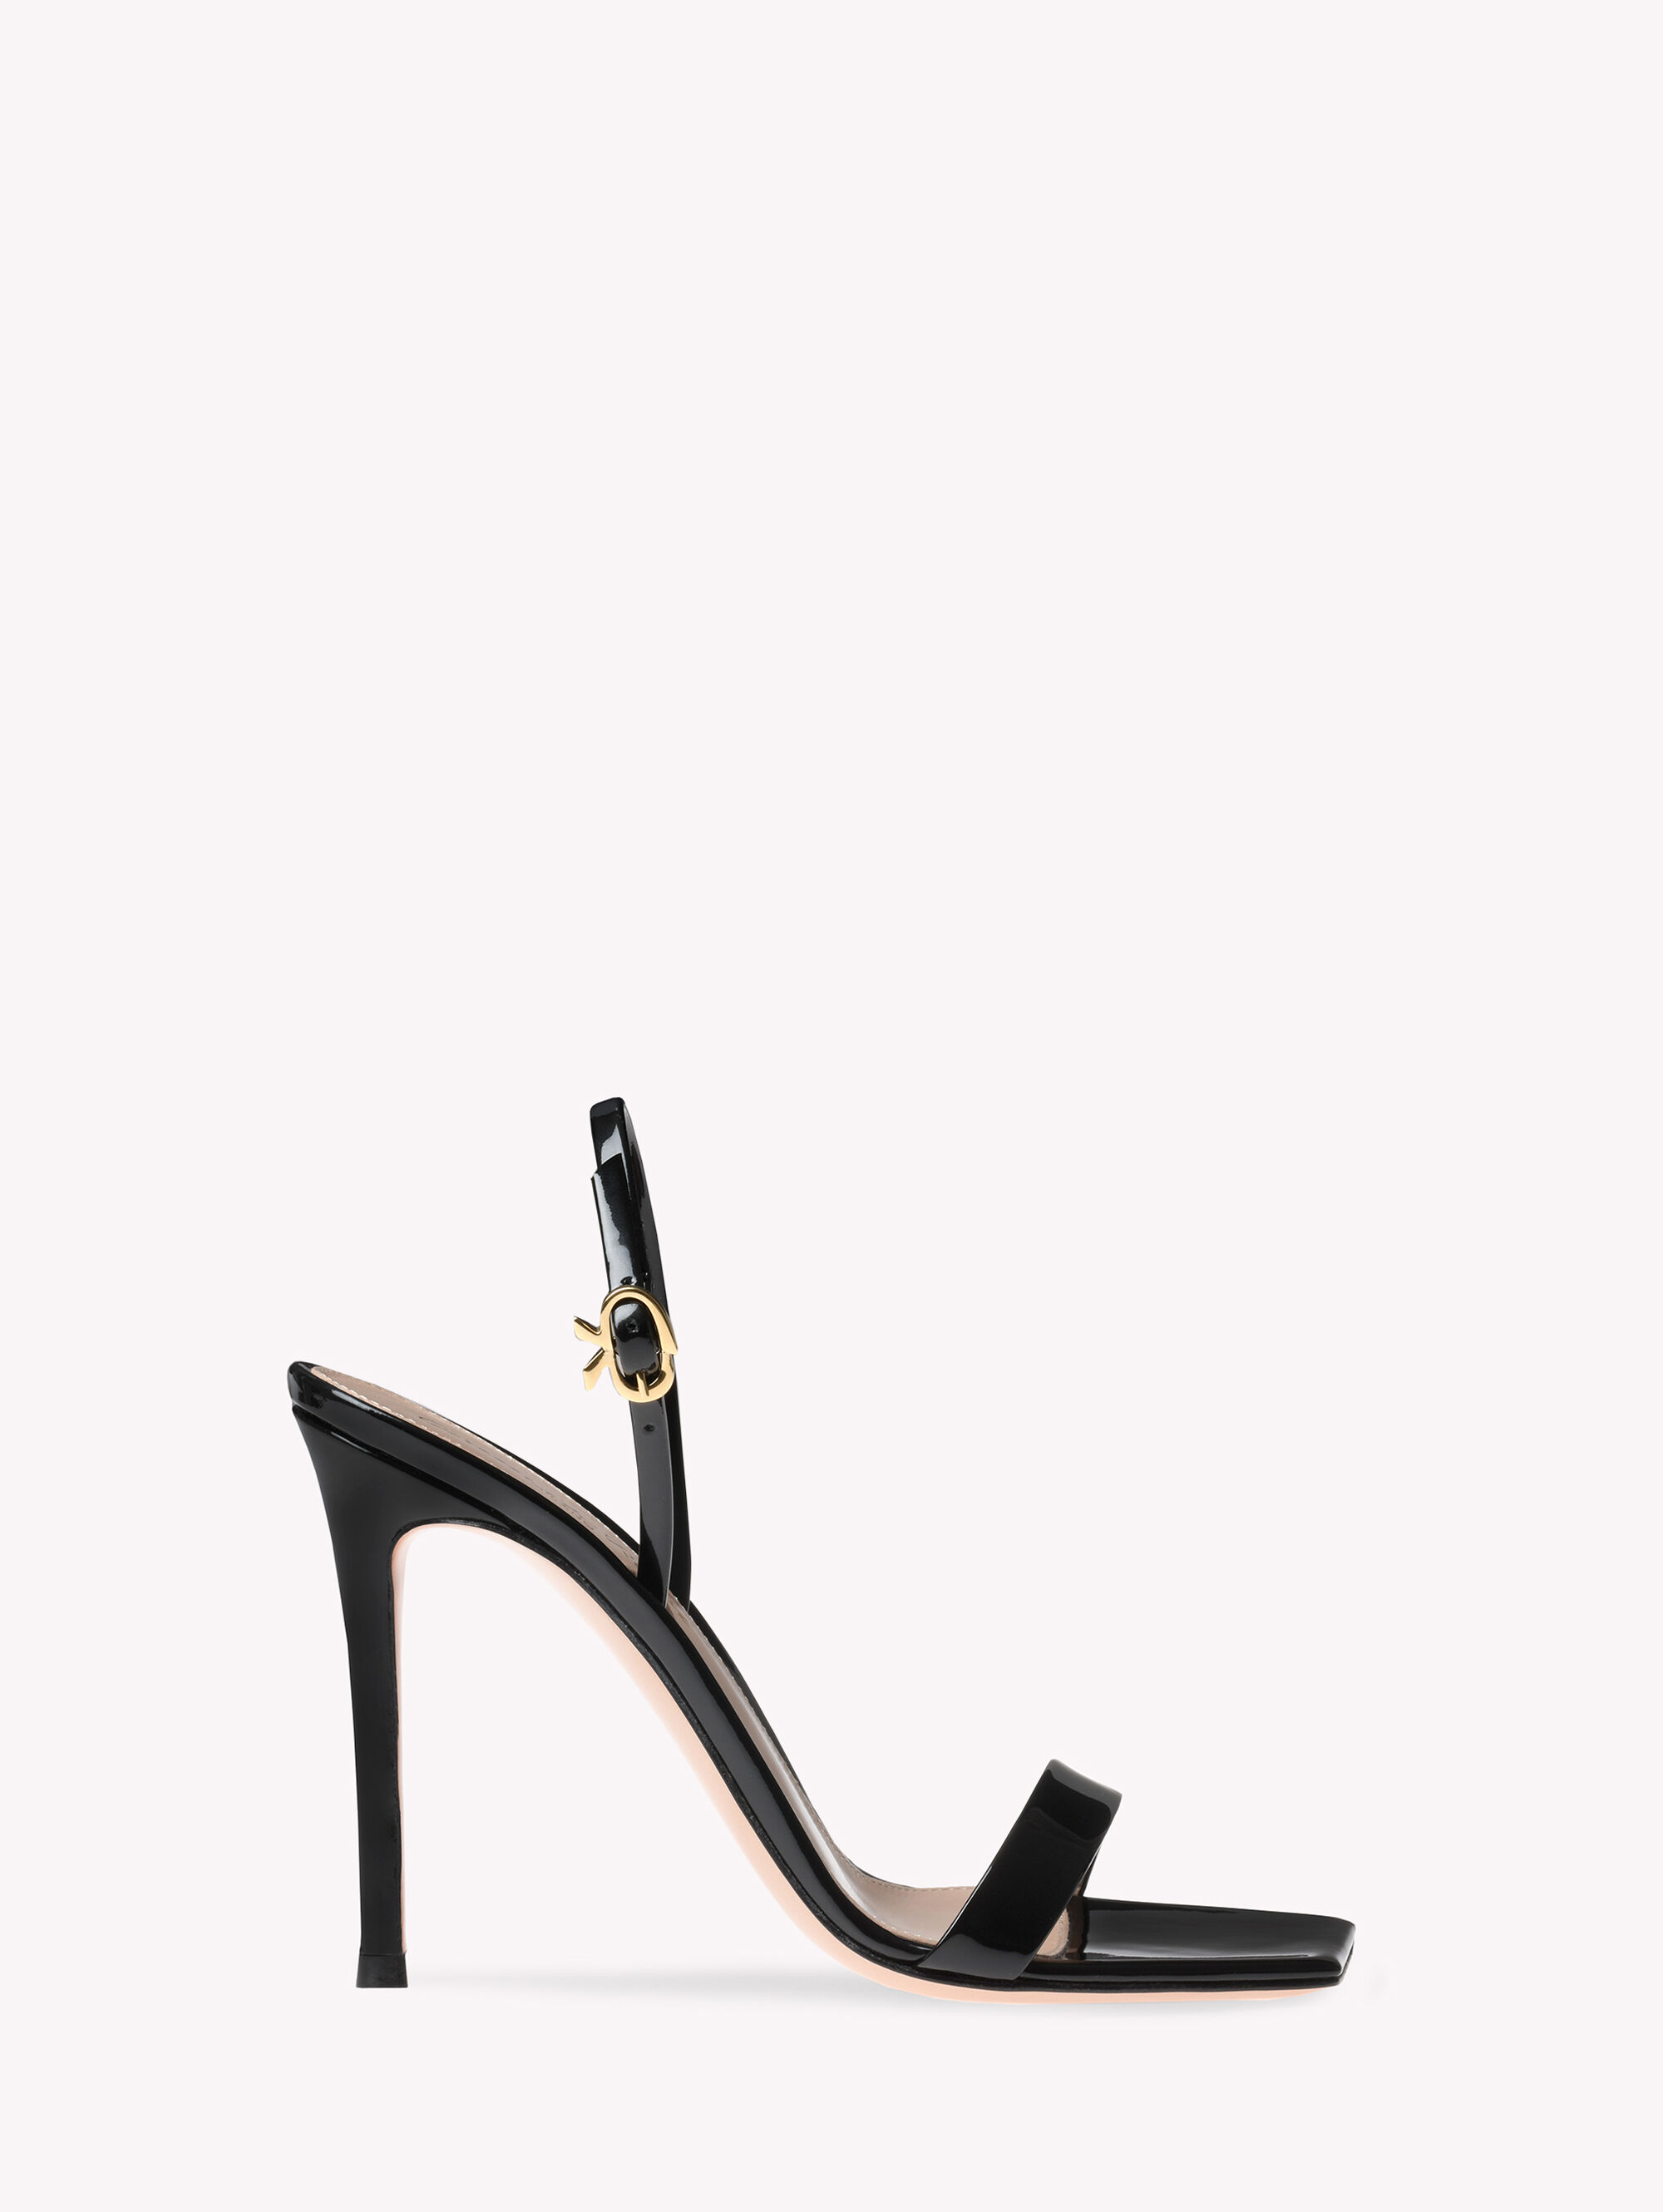 Luxury Shoes and Accessories for Women | Gianvito Rossi